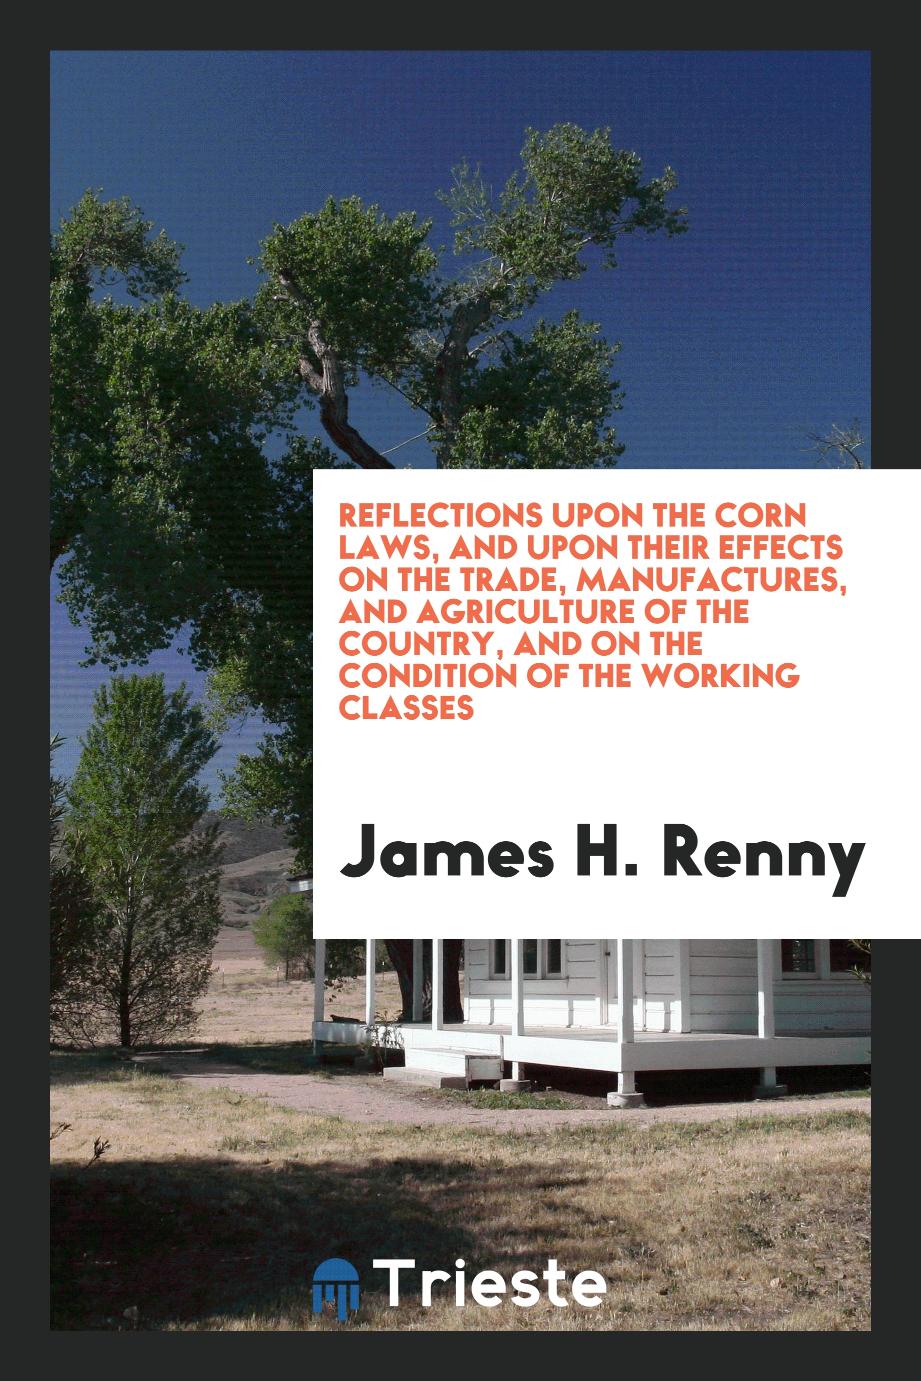 Reflections upon the Corn Laws, and upon Their Effects on the Trade, Manufactures, and Agriculture of the Country, and on the Condition of the Working Classes